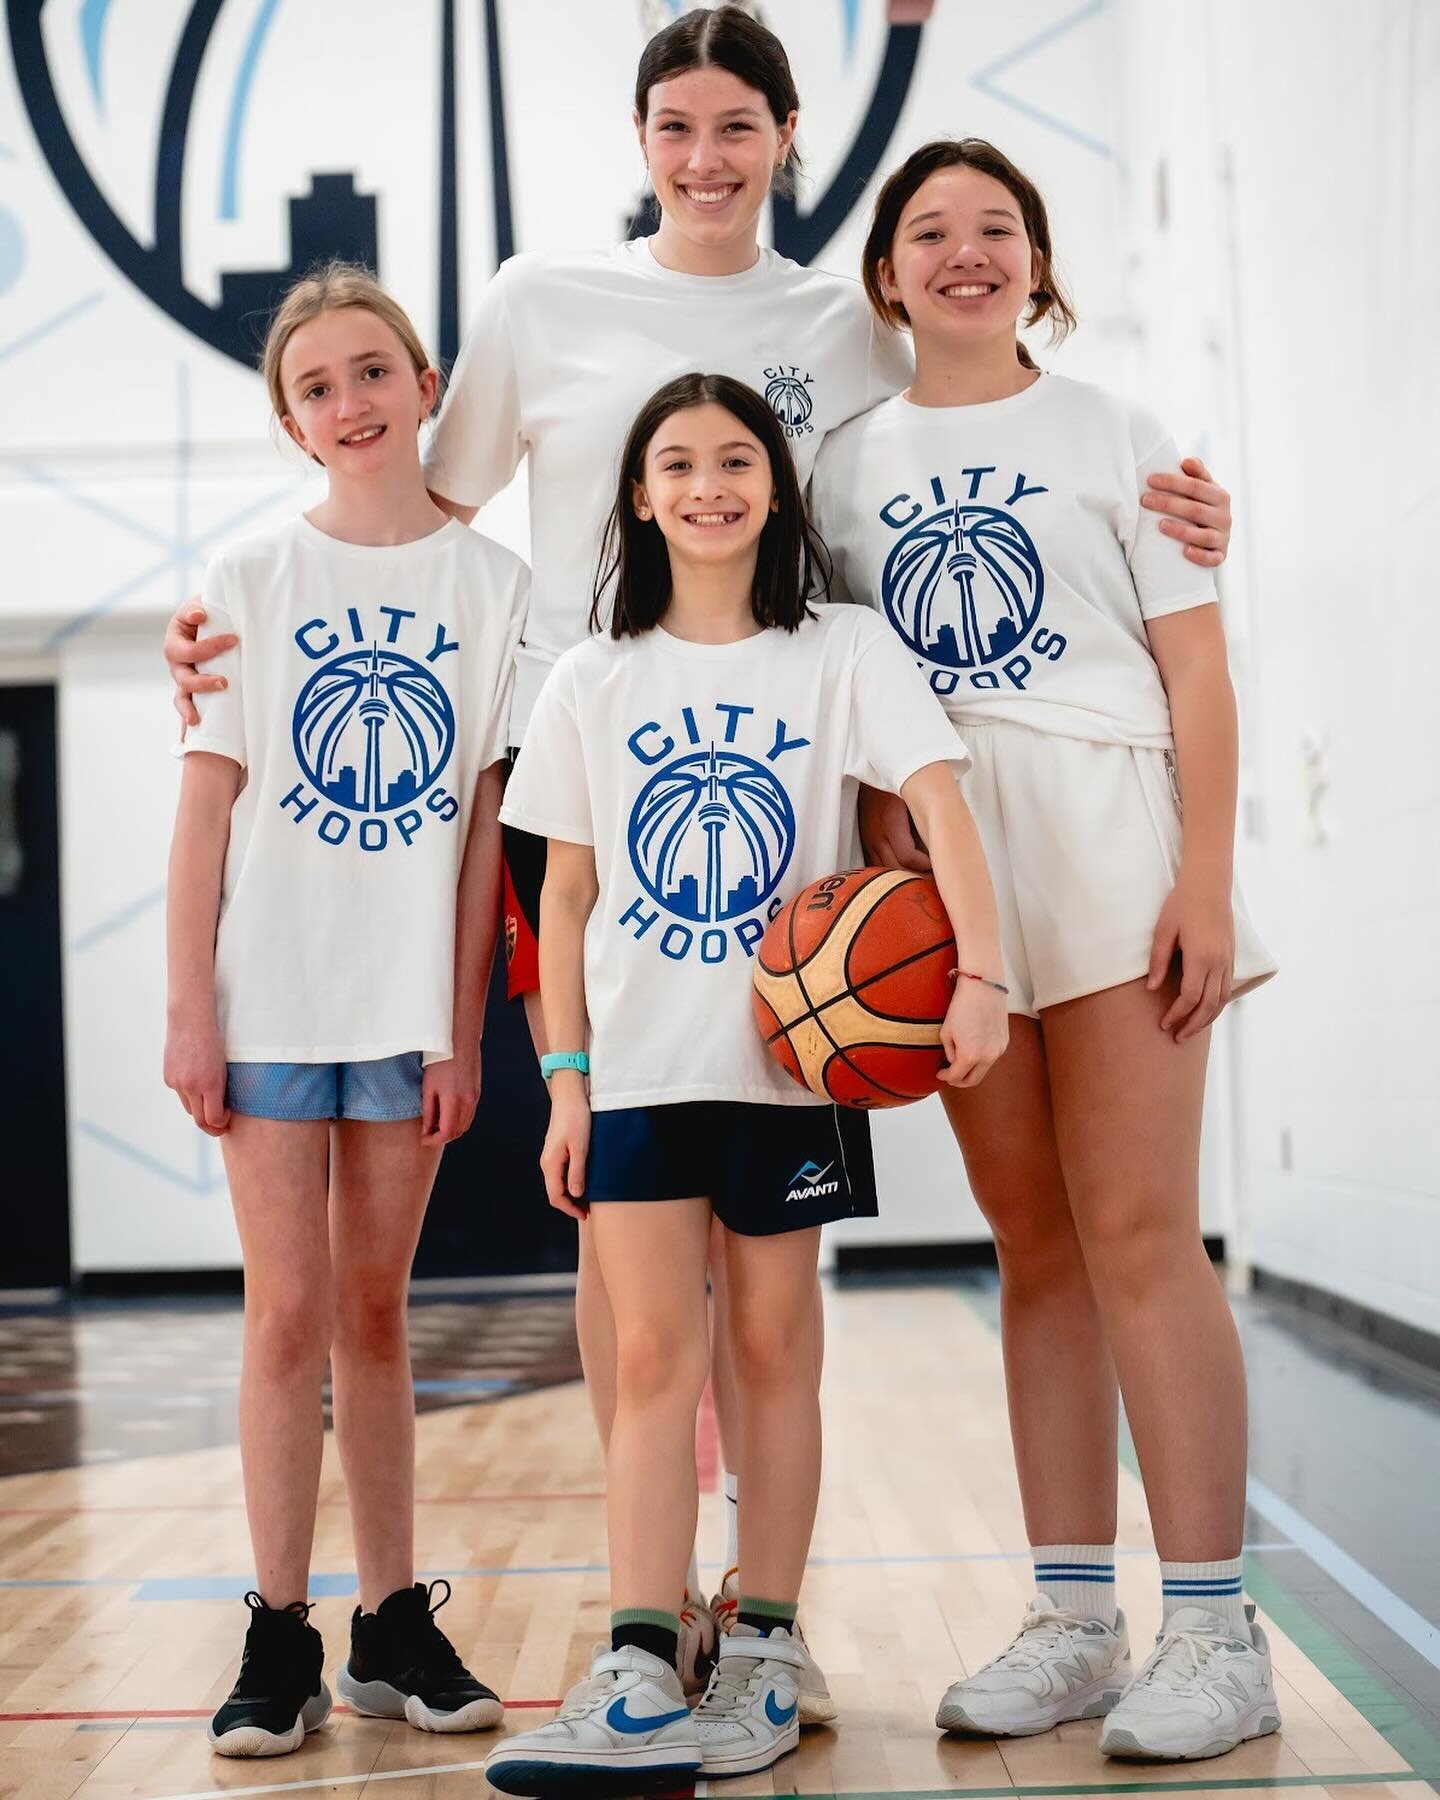 Girls Only Sessions are back this season!

Starting tomorrow at 10am!

#CityHoops #Basketball #Toronto #Youth #Camps